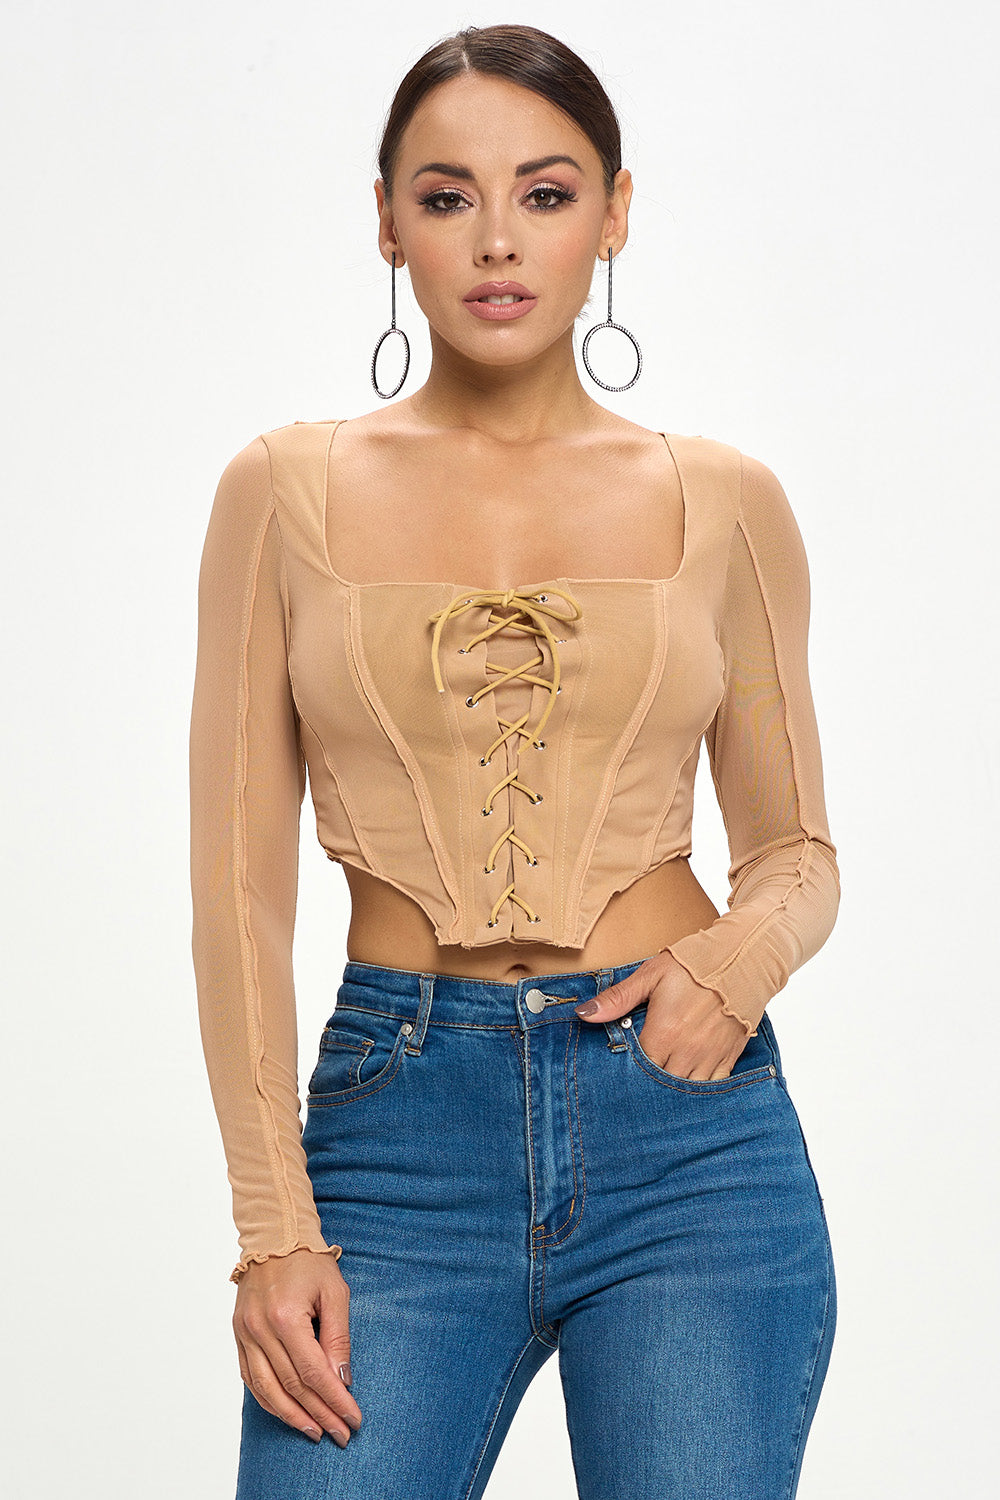 LACE-UP FRONT DETAIL CORSET BODICE LONG SLEEVE TOP